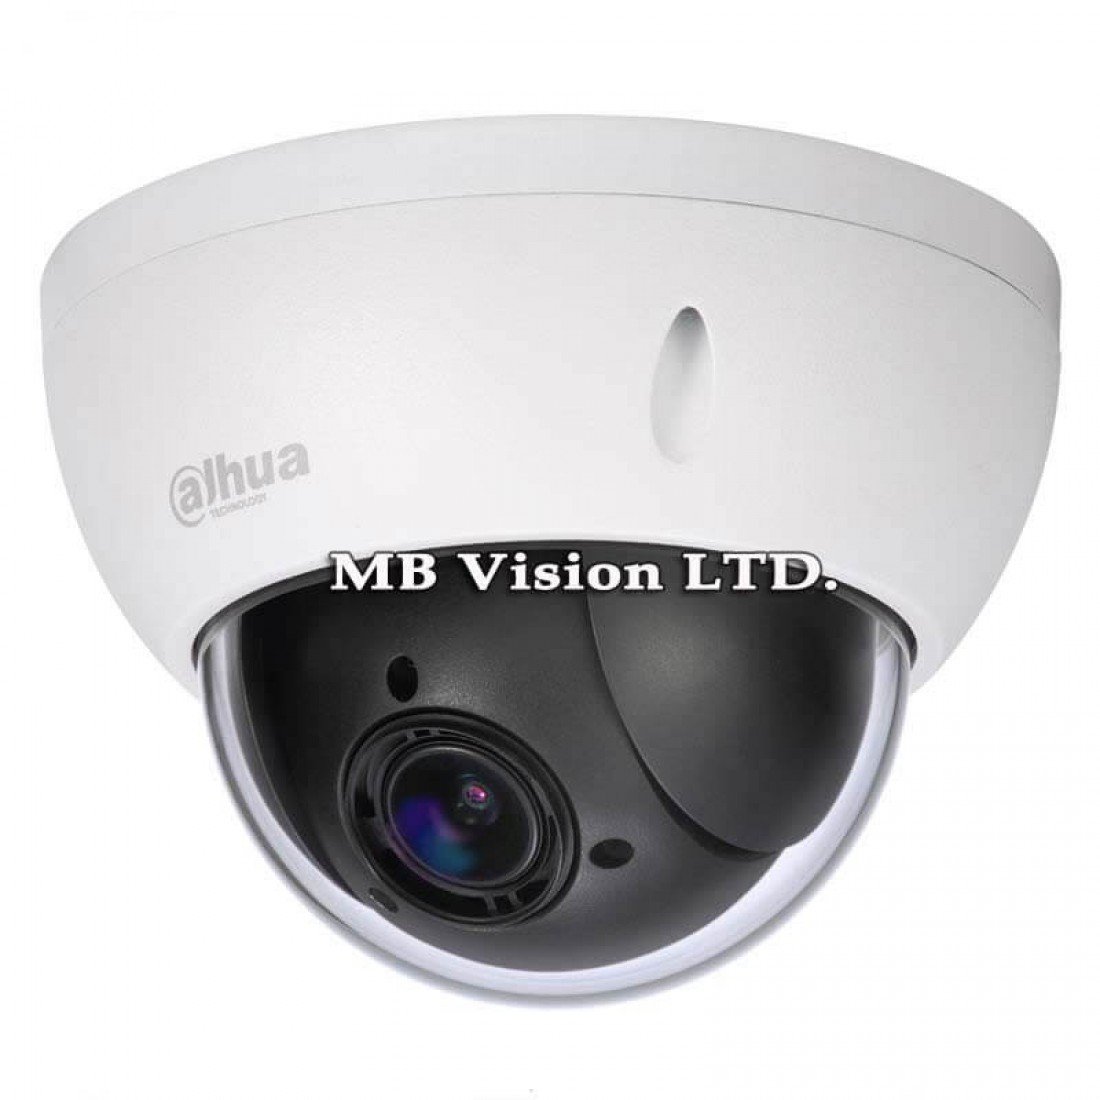 Dahua камеры купить. DH-sd22204t-GN. Hikvision DS-2cd2122fwd-is. DH-sd22204-GC-lb. DS-2cd2122fwd-is.